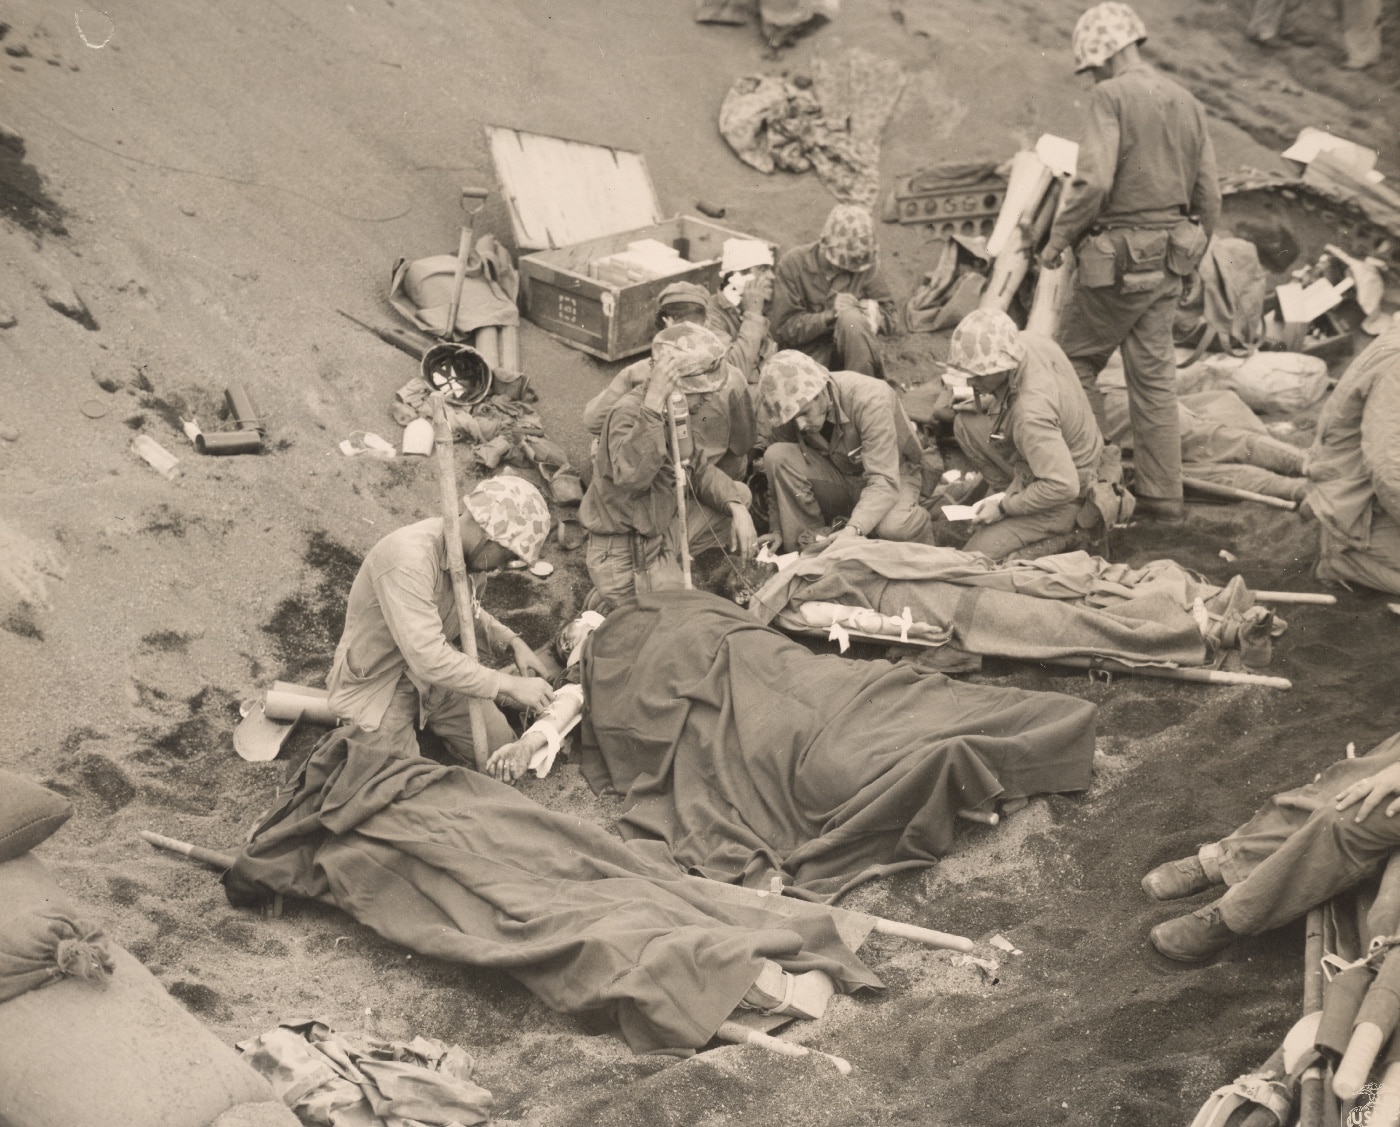 Navy corpsmen administer to wounded Marines at an aid station established in a gully on Iwo Jima. Image: Warrant Officer Obie Newcomb/U.S. Marine Corps